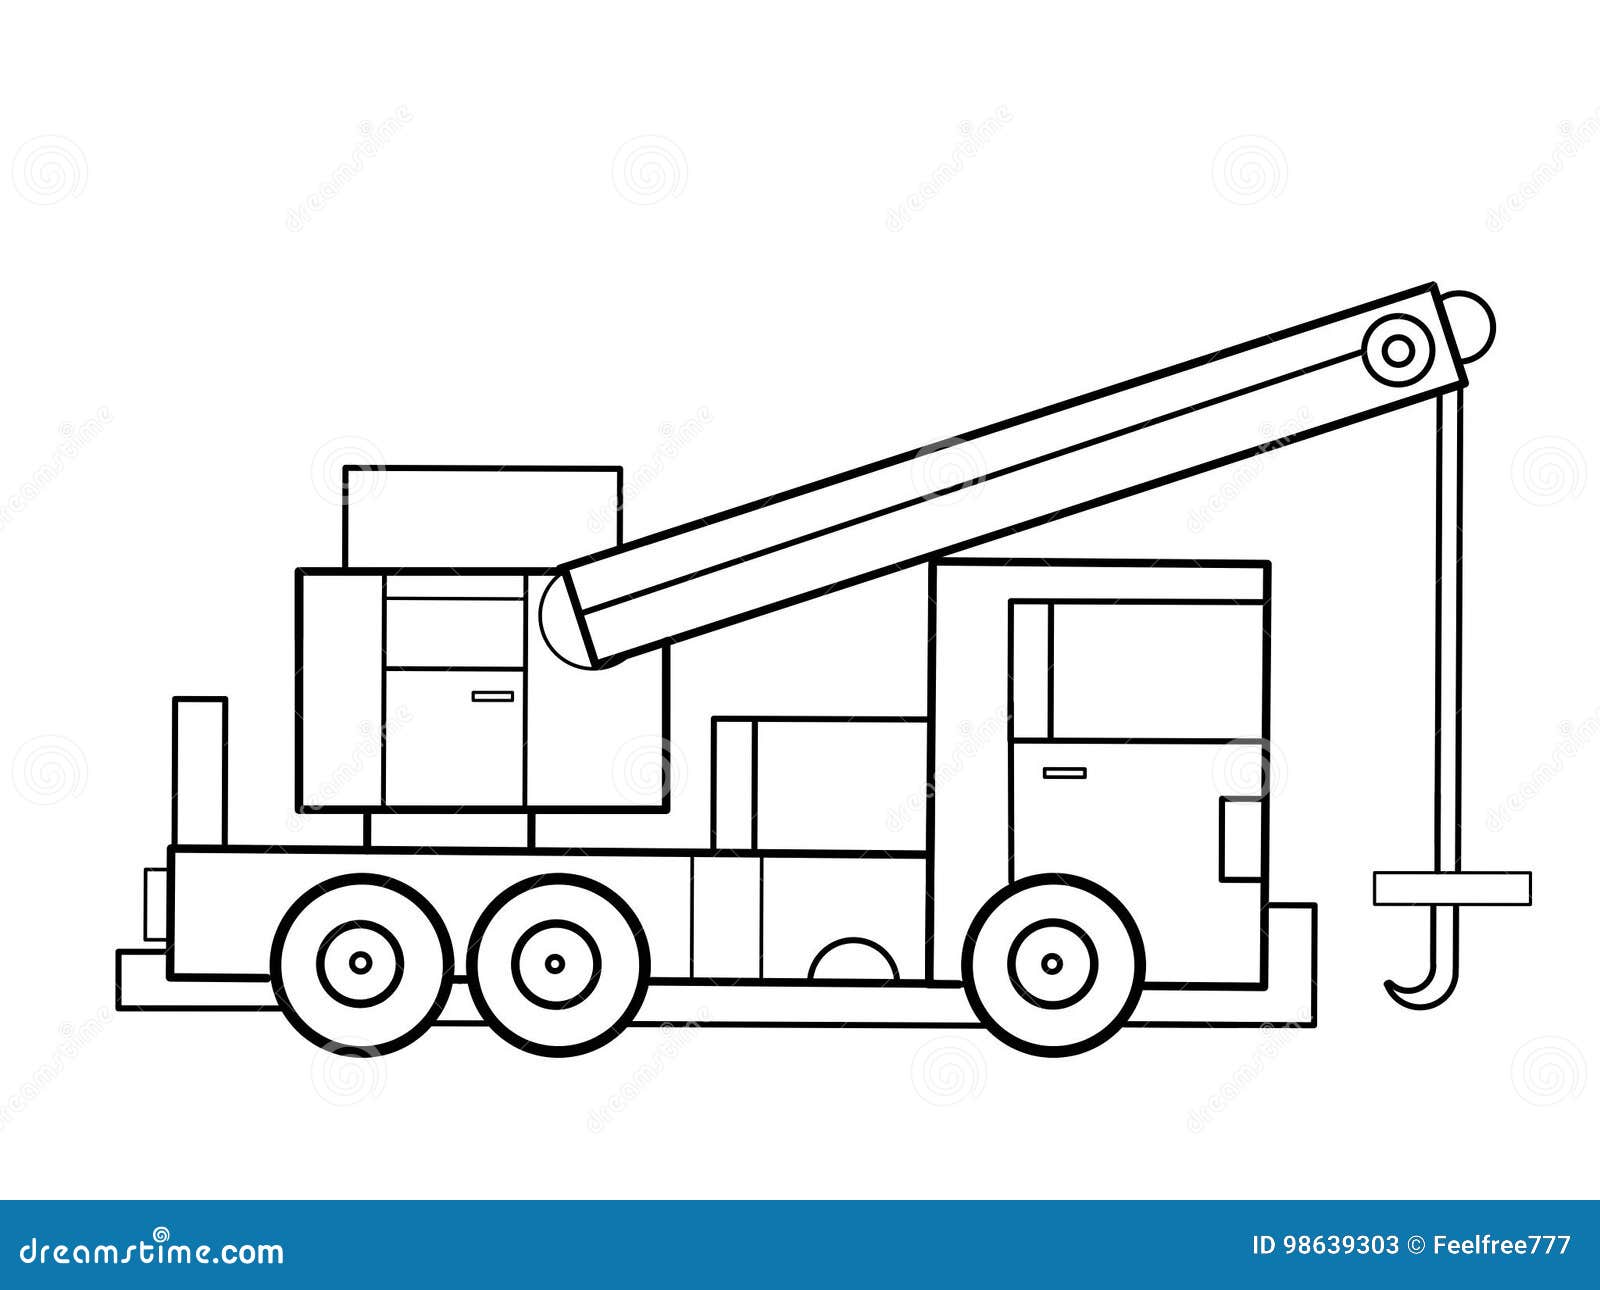 Crane Truck Kids Educational Coloring Pages Stock ...